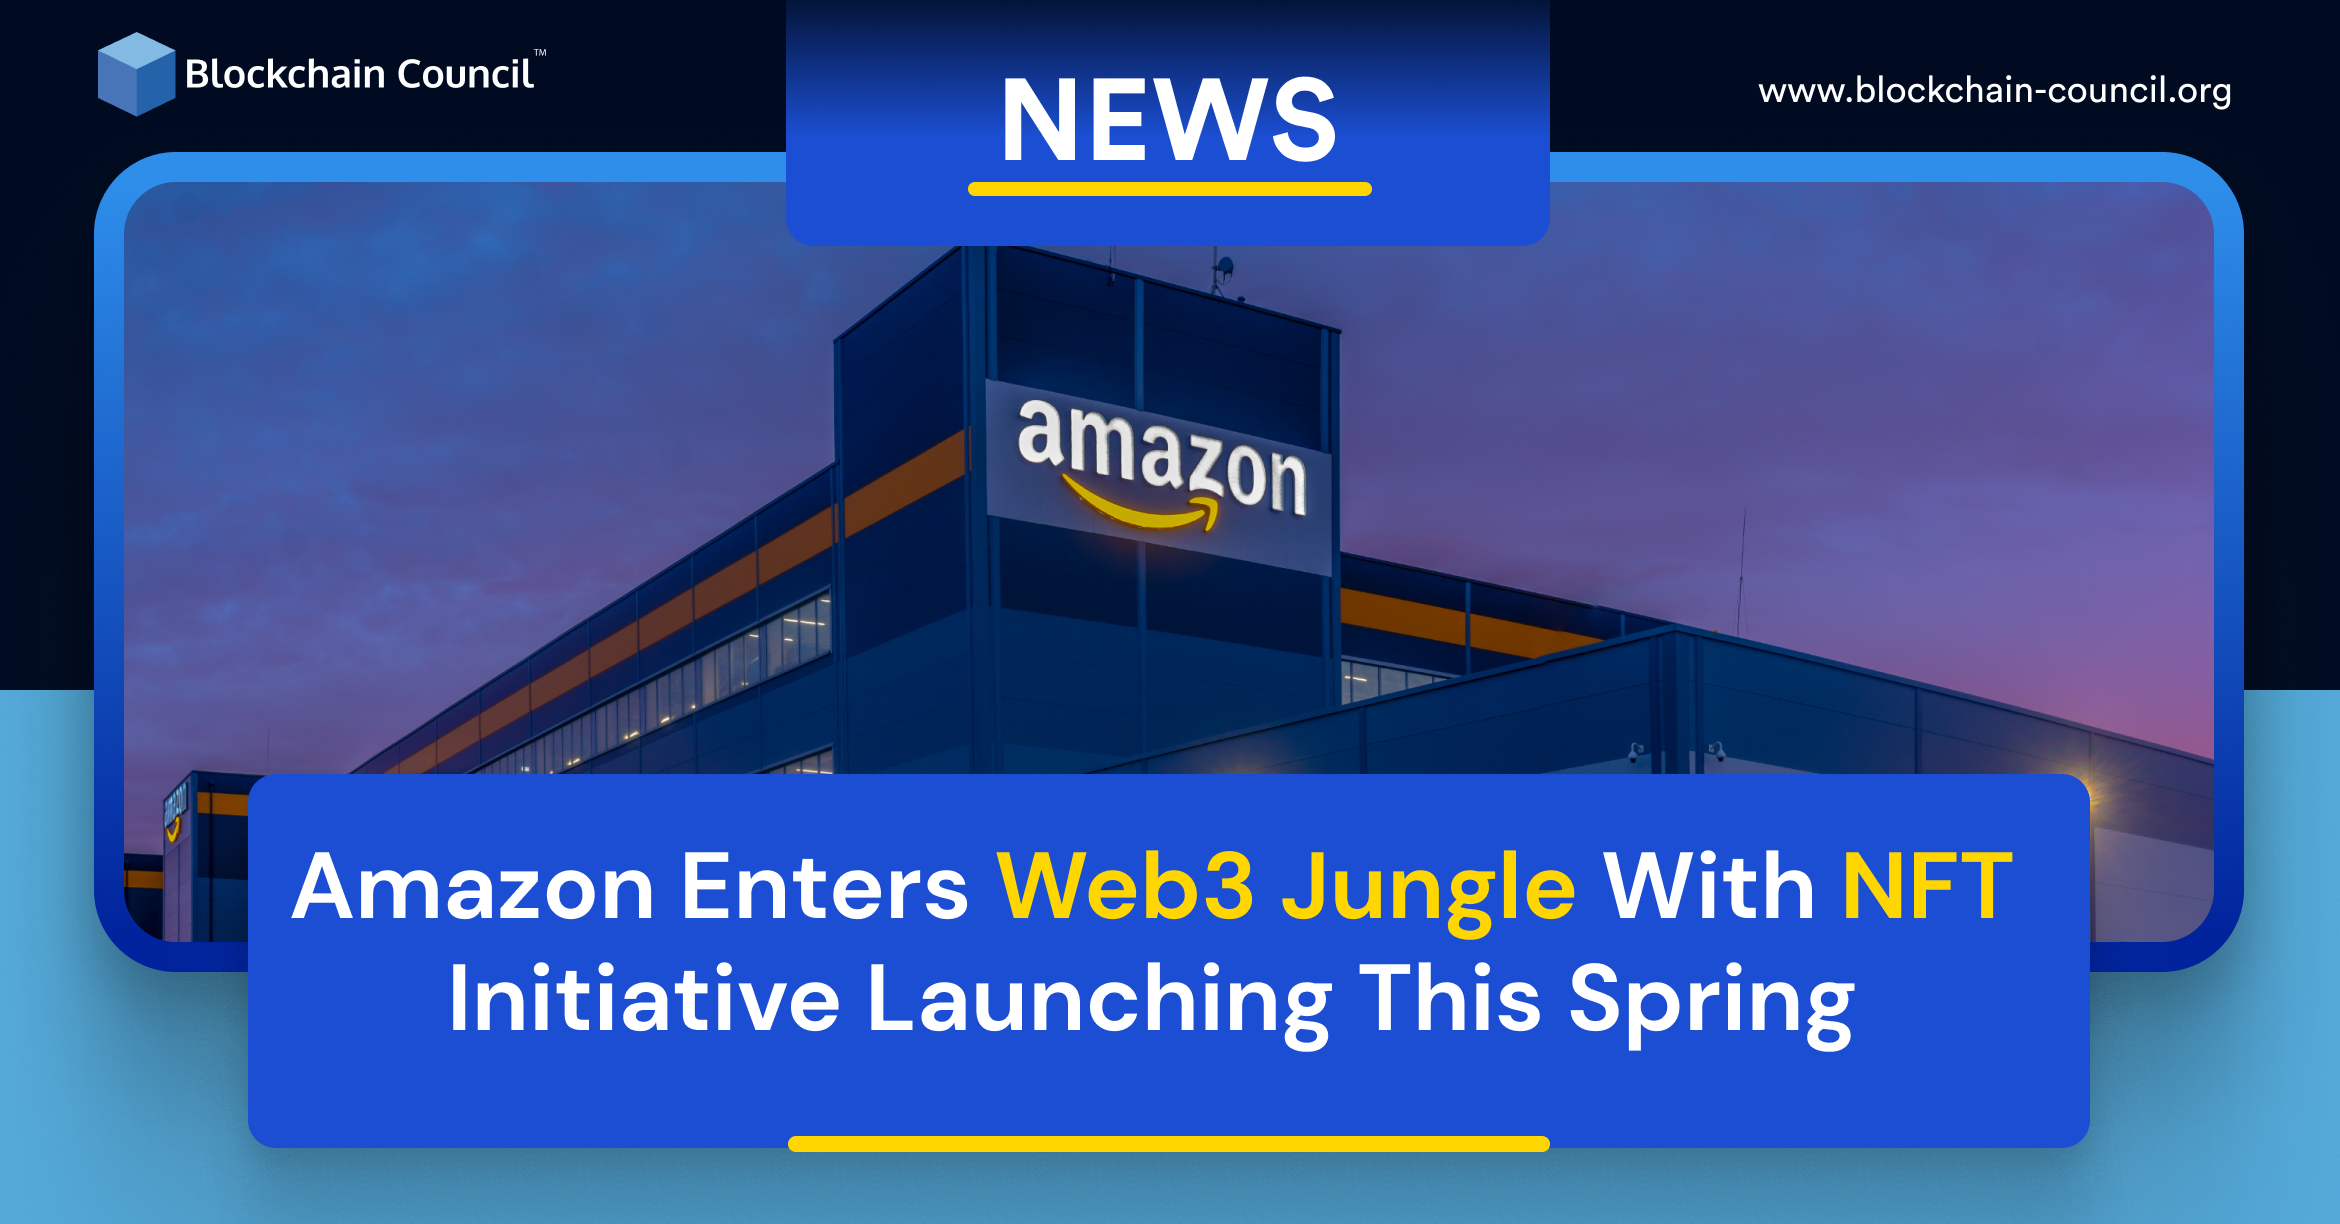 Amazon Enters Web3 Jungle With NFT Initiative Launching This Spring